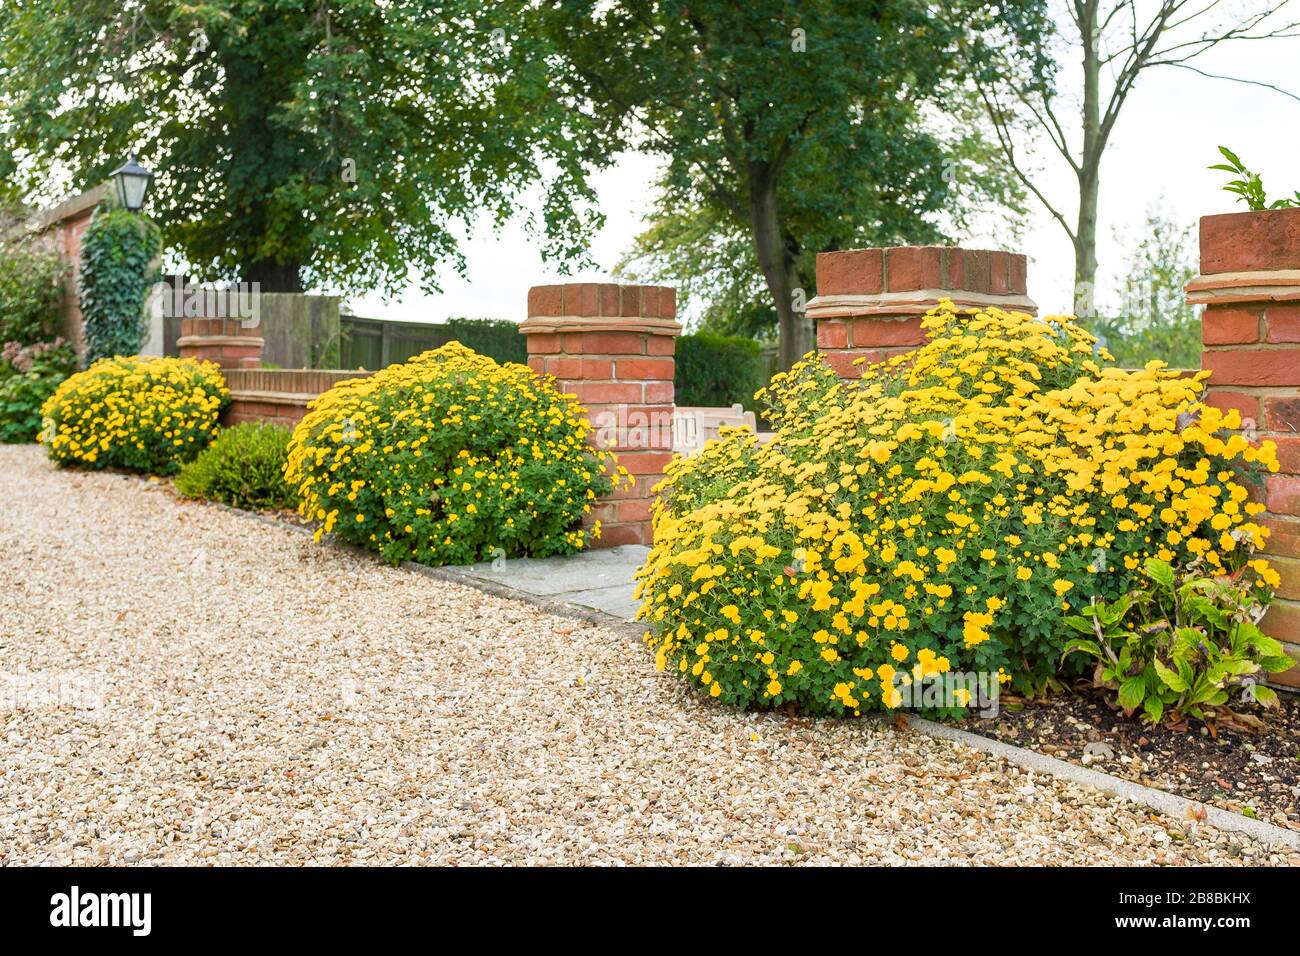 Chrysanthemum perennial plants, (hardy mums,) with yellow flowers, in an English garden border in Autumn, UK Stock Photo